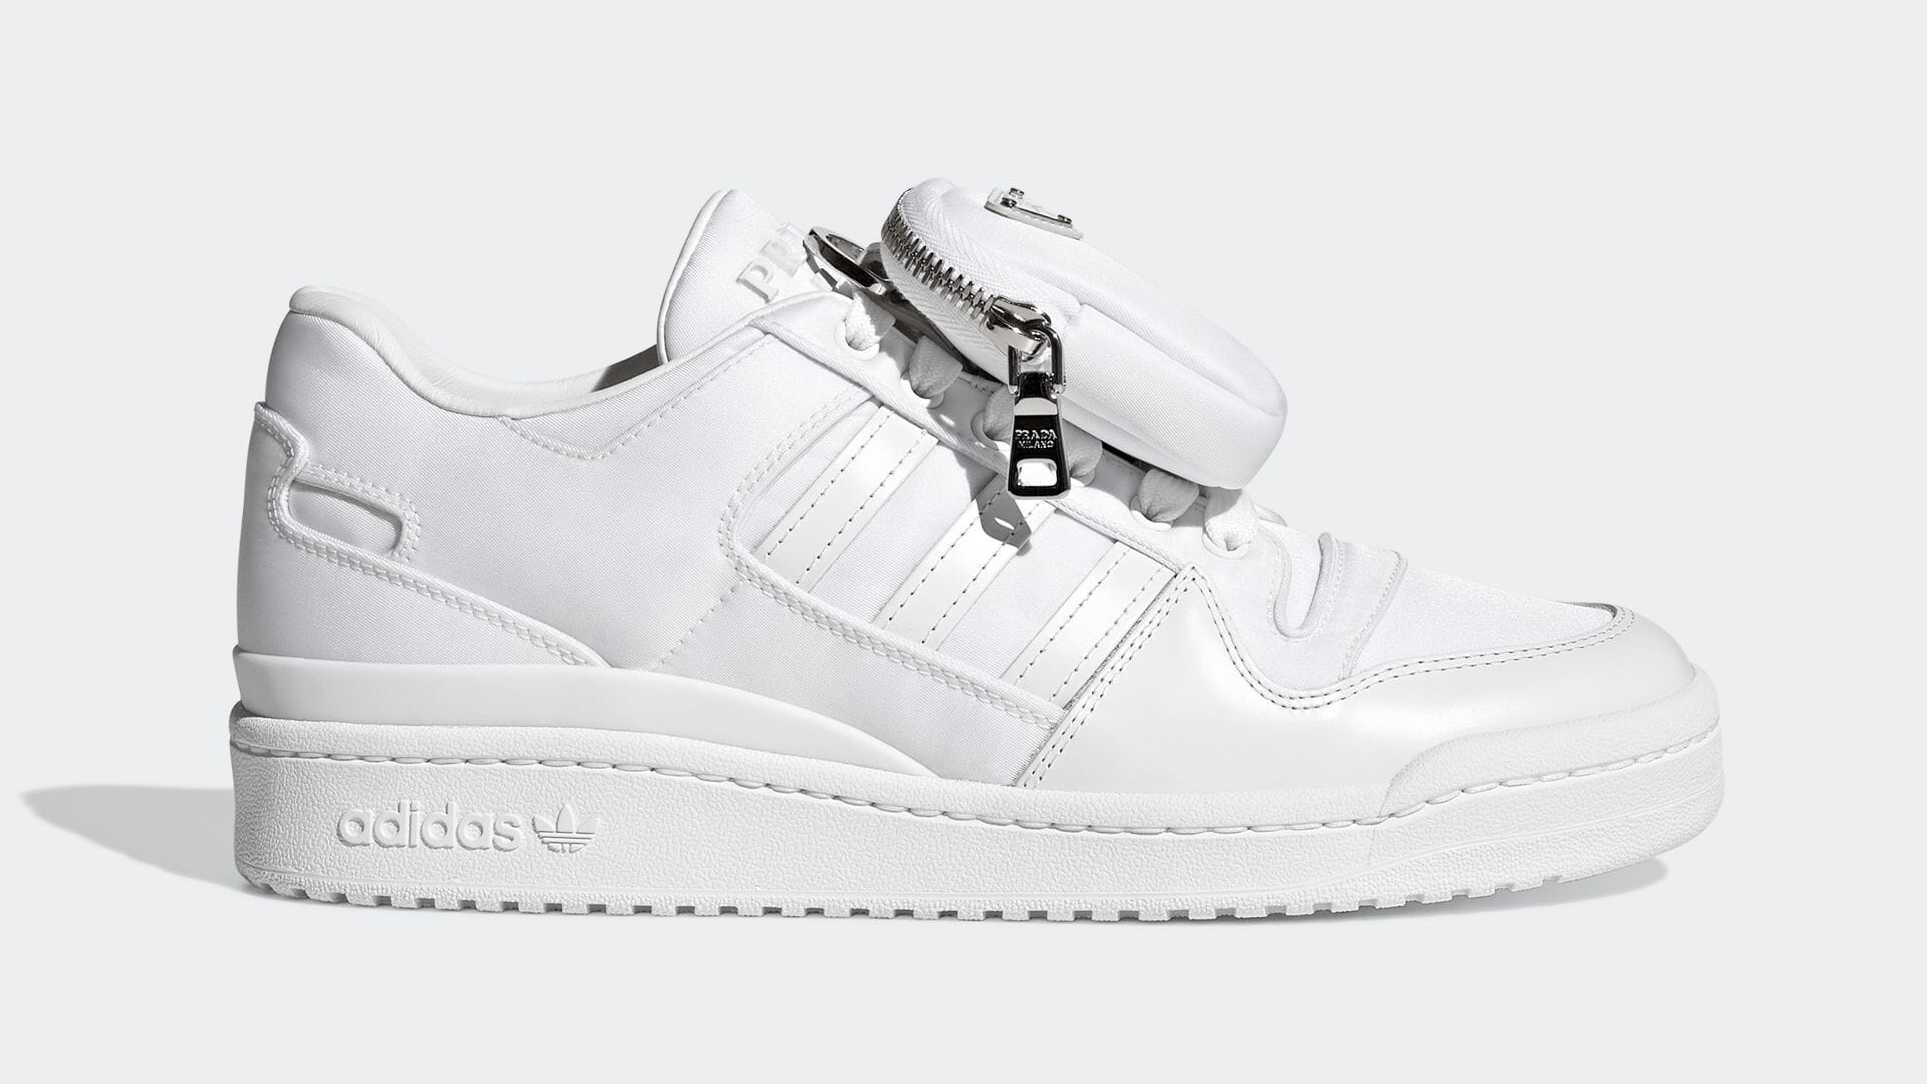 Prada x Adidas Forum Low and High Release Date Jan. 2022 | Sole Collector